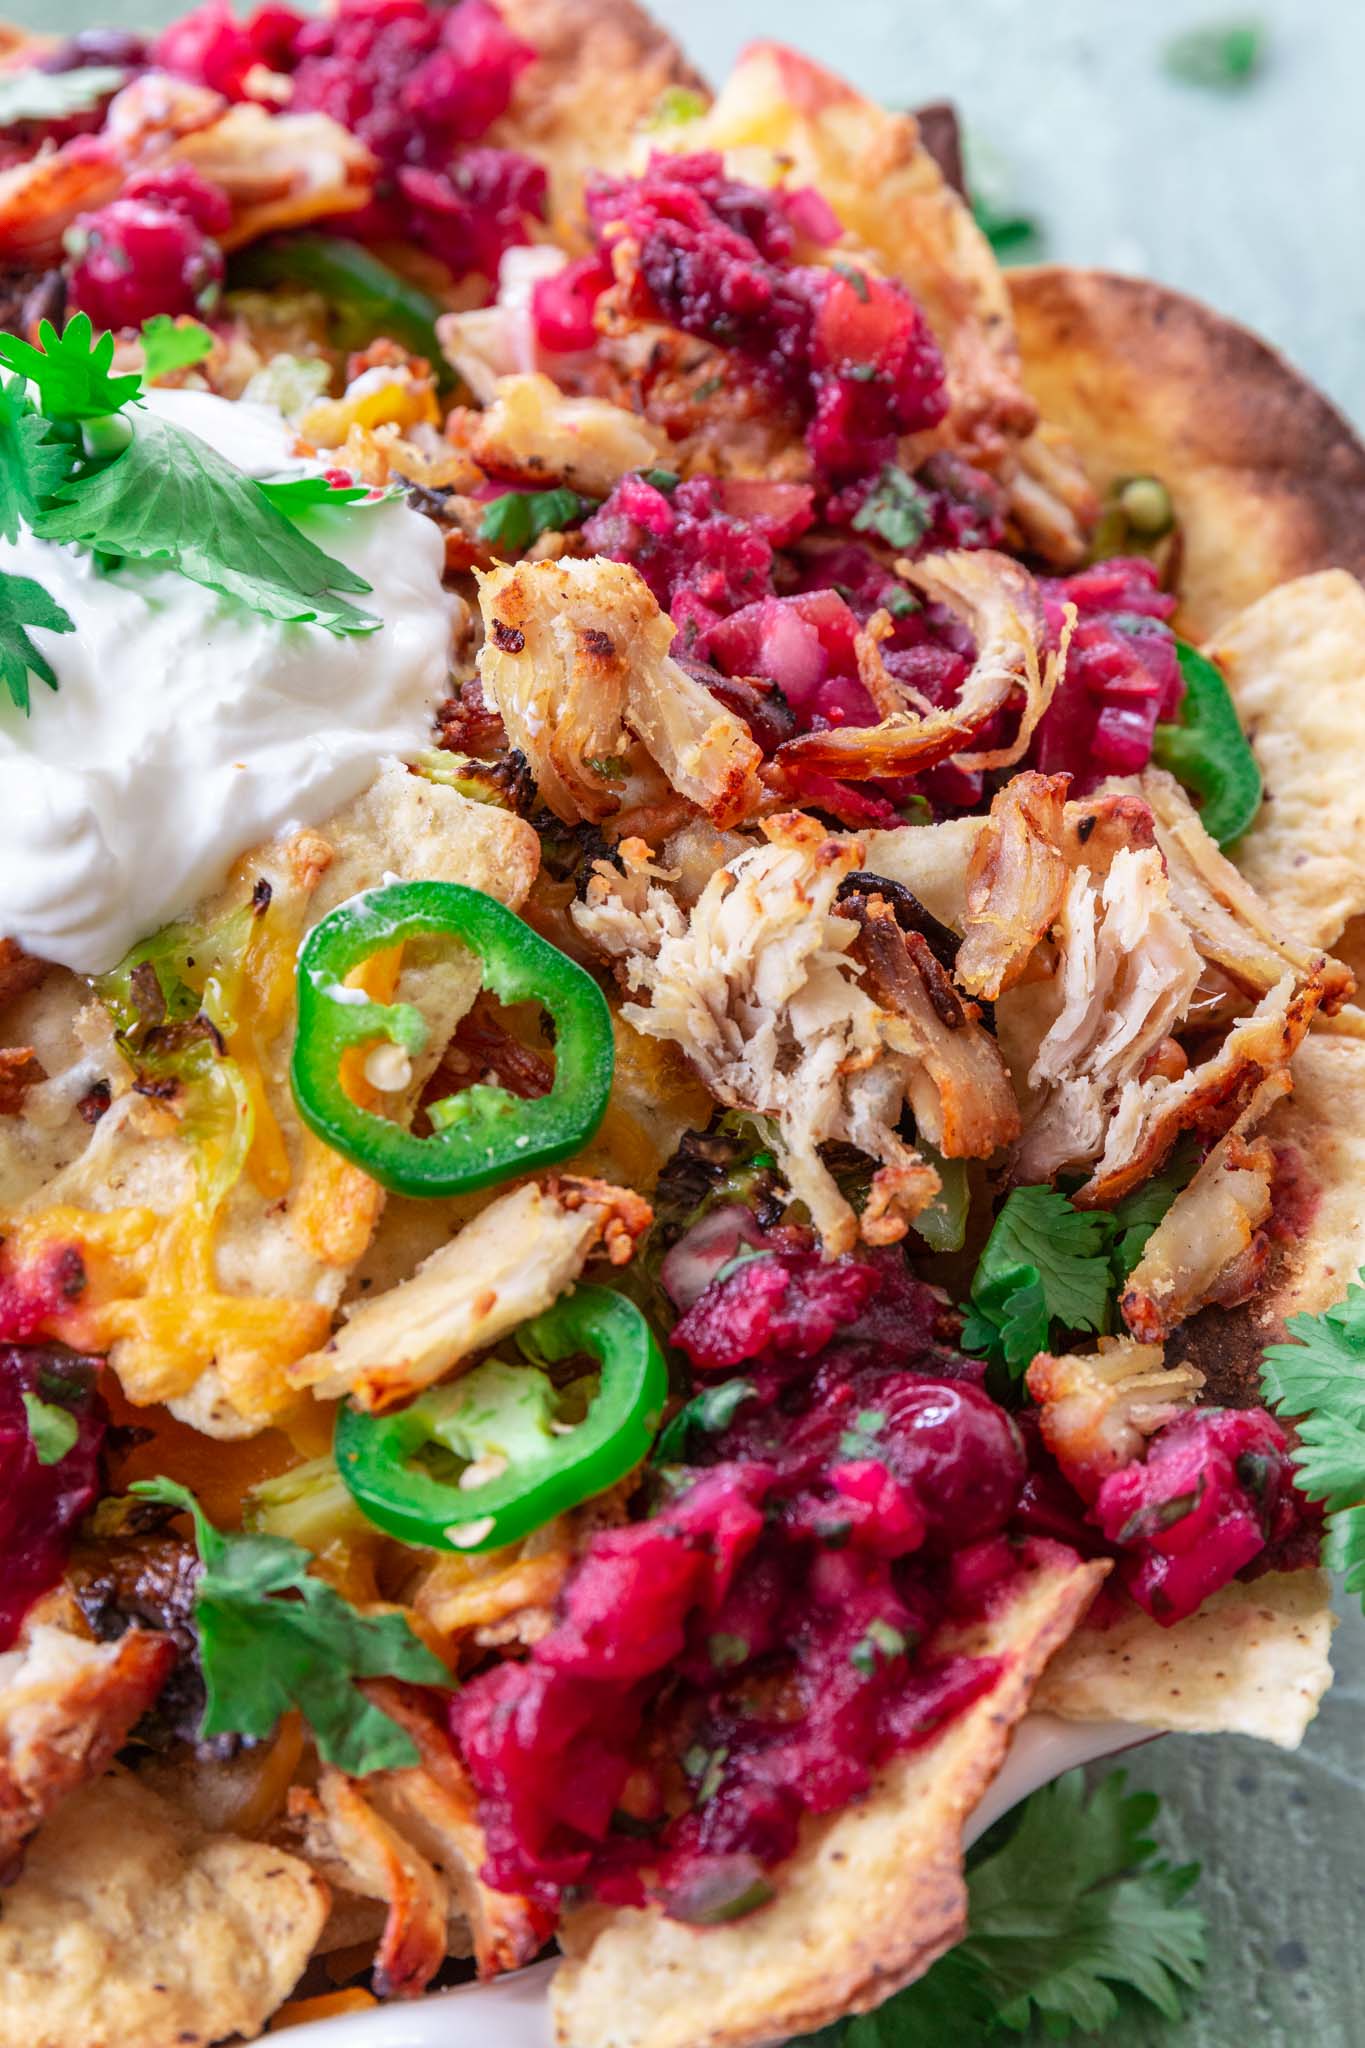 Thanksgiving Leftover Turkey Nachos | www.oliviascuisine.com | If you're looking for a way to use all that leftover turkey from Thanksgiving, these Leftover Turkey Nachos might be just what you need! Crispy Mission® Triangles Tortilla Chips topped with turkey carnitas, cranberry sauce salsa, Brussels sprouts and lots of cheese. Oh, it doesn't get better than that!